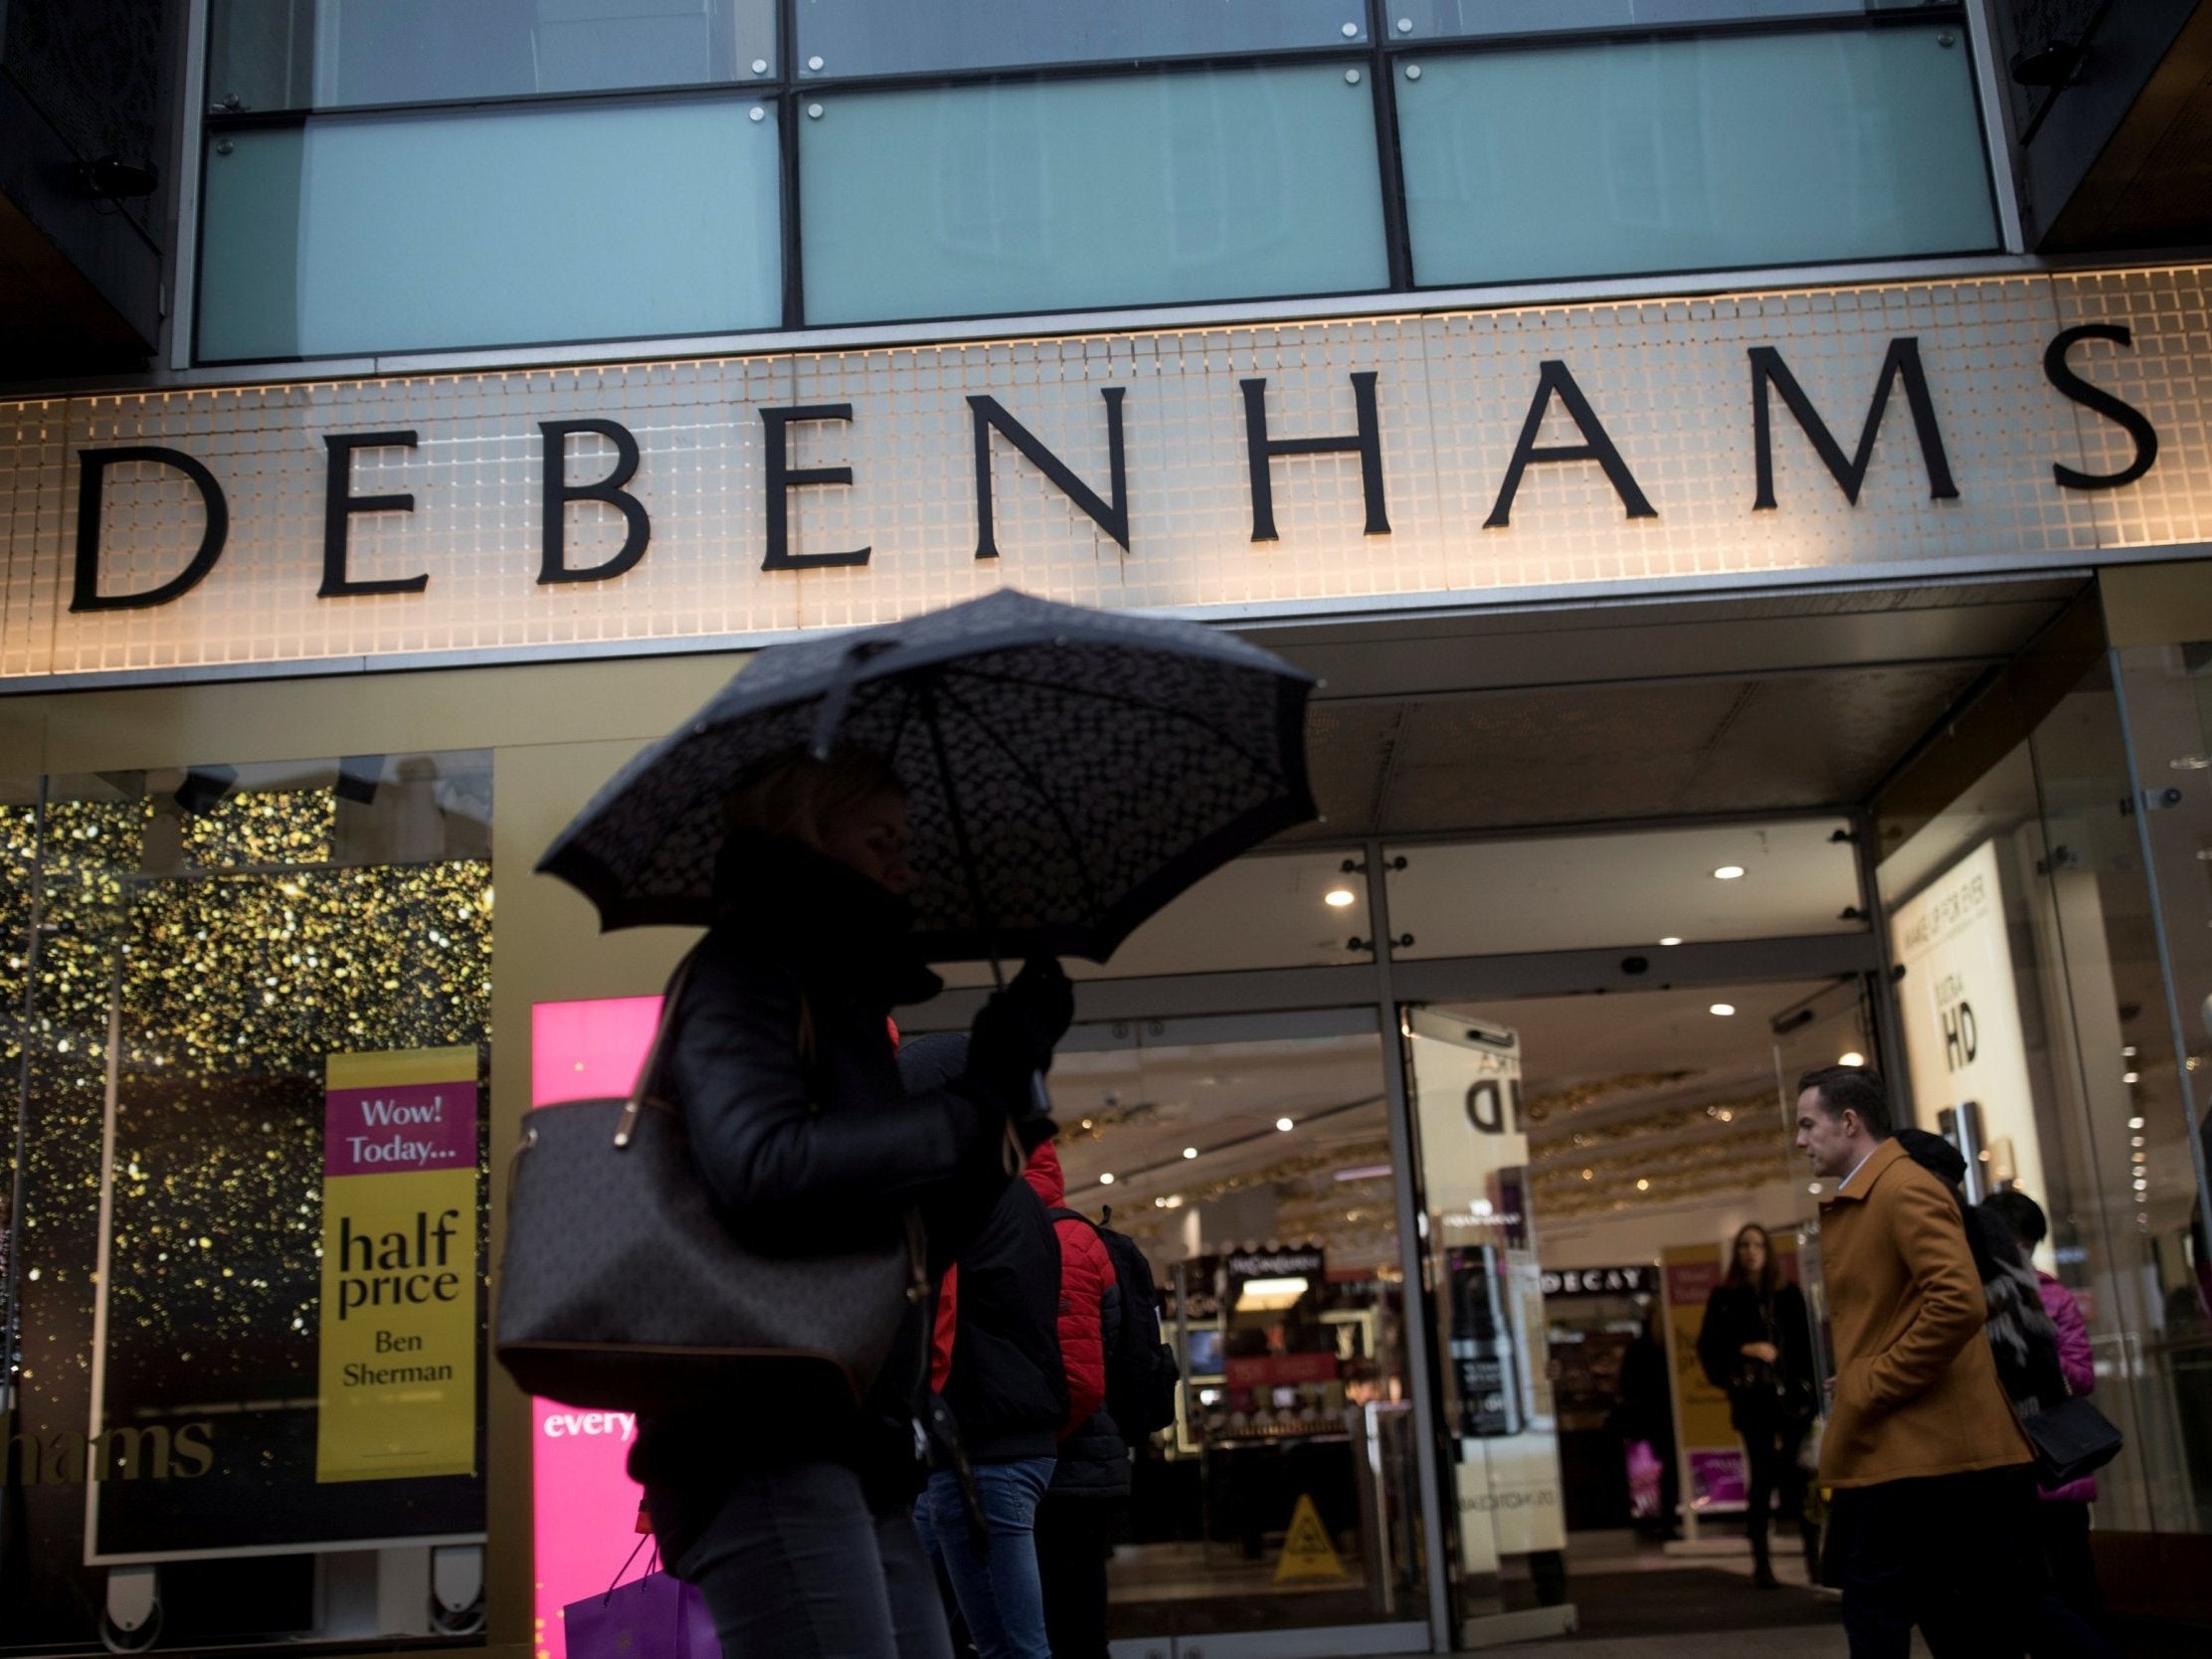 Debenhams: Sports Direct has proposed a £61m takeover of the beleaguered group